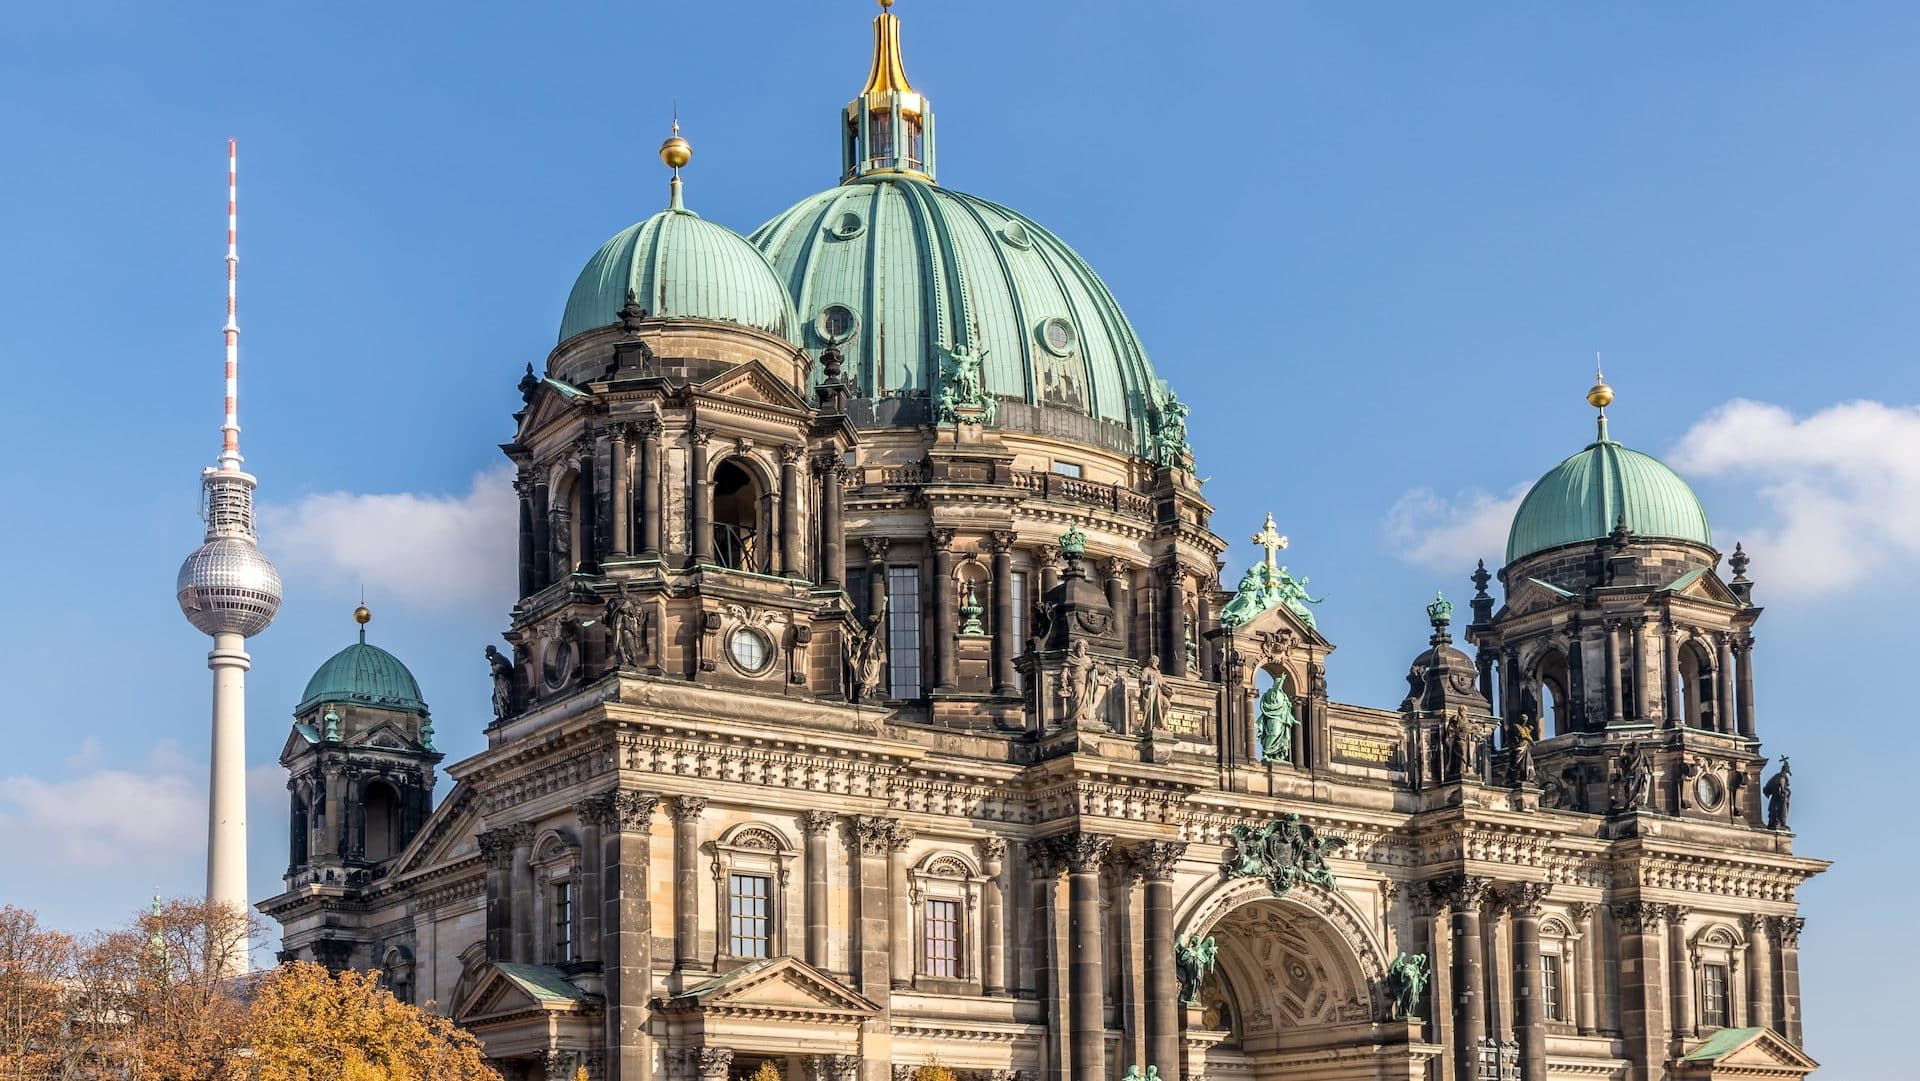 Located in the heart of Berlin, Mitte is home to a good portion of the German capital's attractions, museums, and hotels